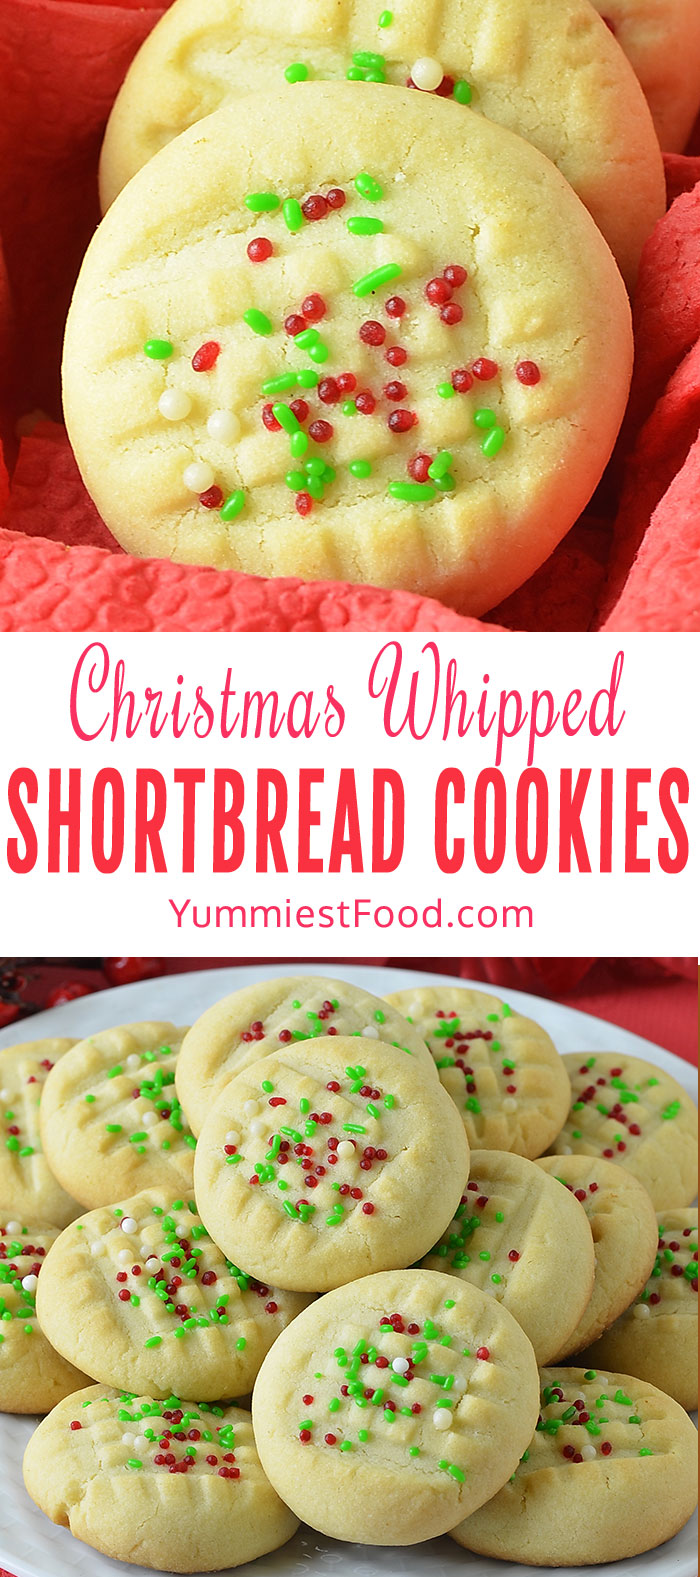 Christmas Whipped Shortbread Cookies are the perfect treat to have on hand during the Holiday season!